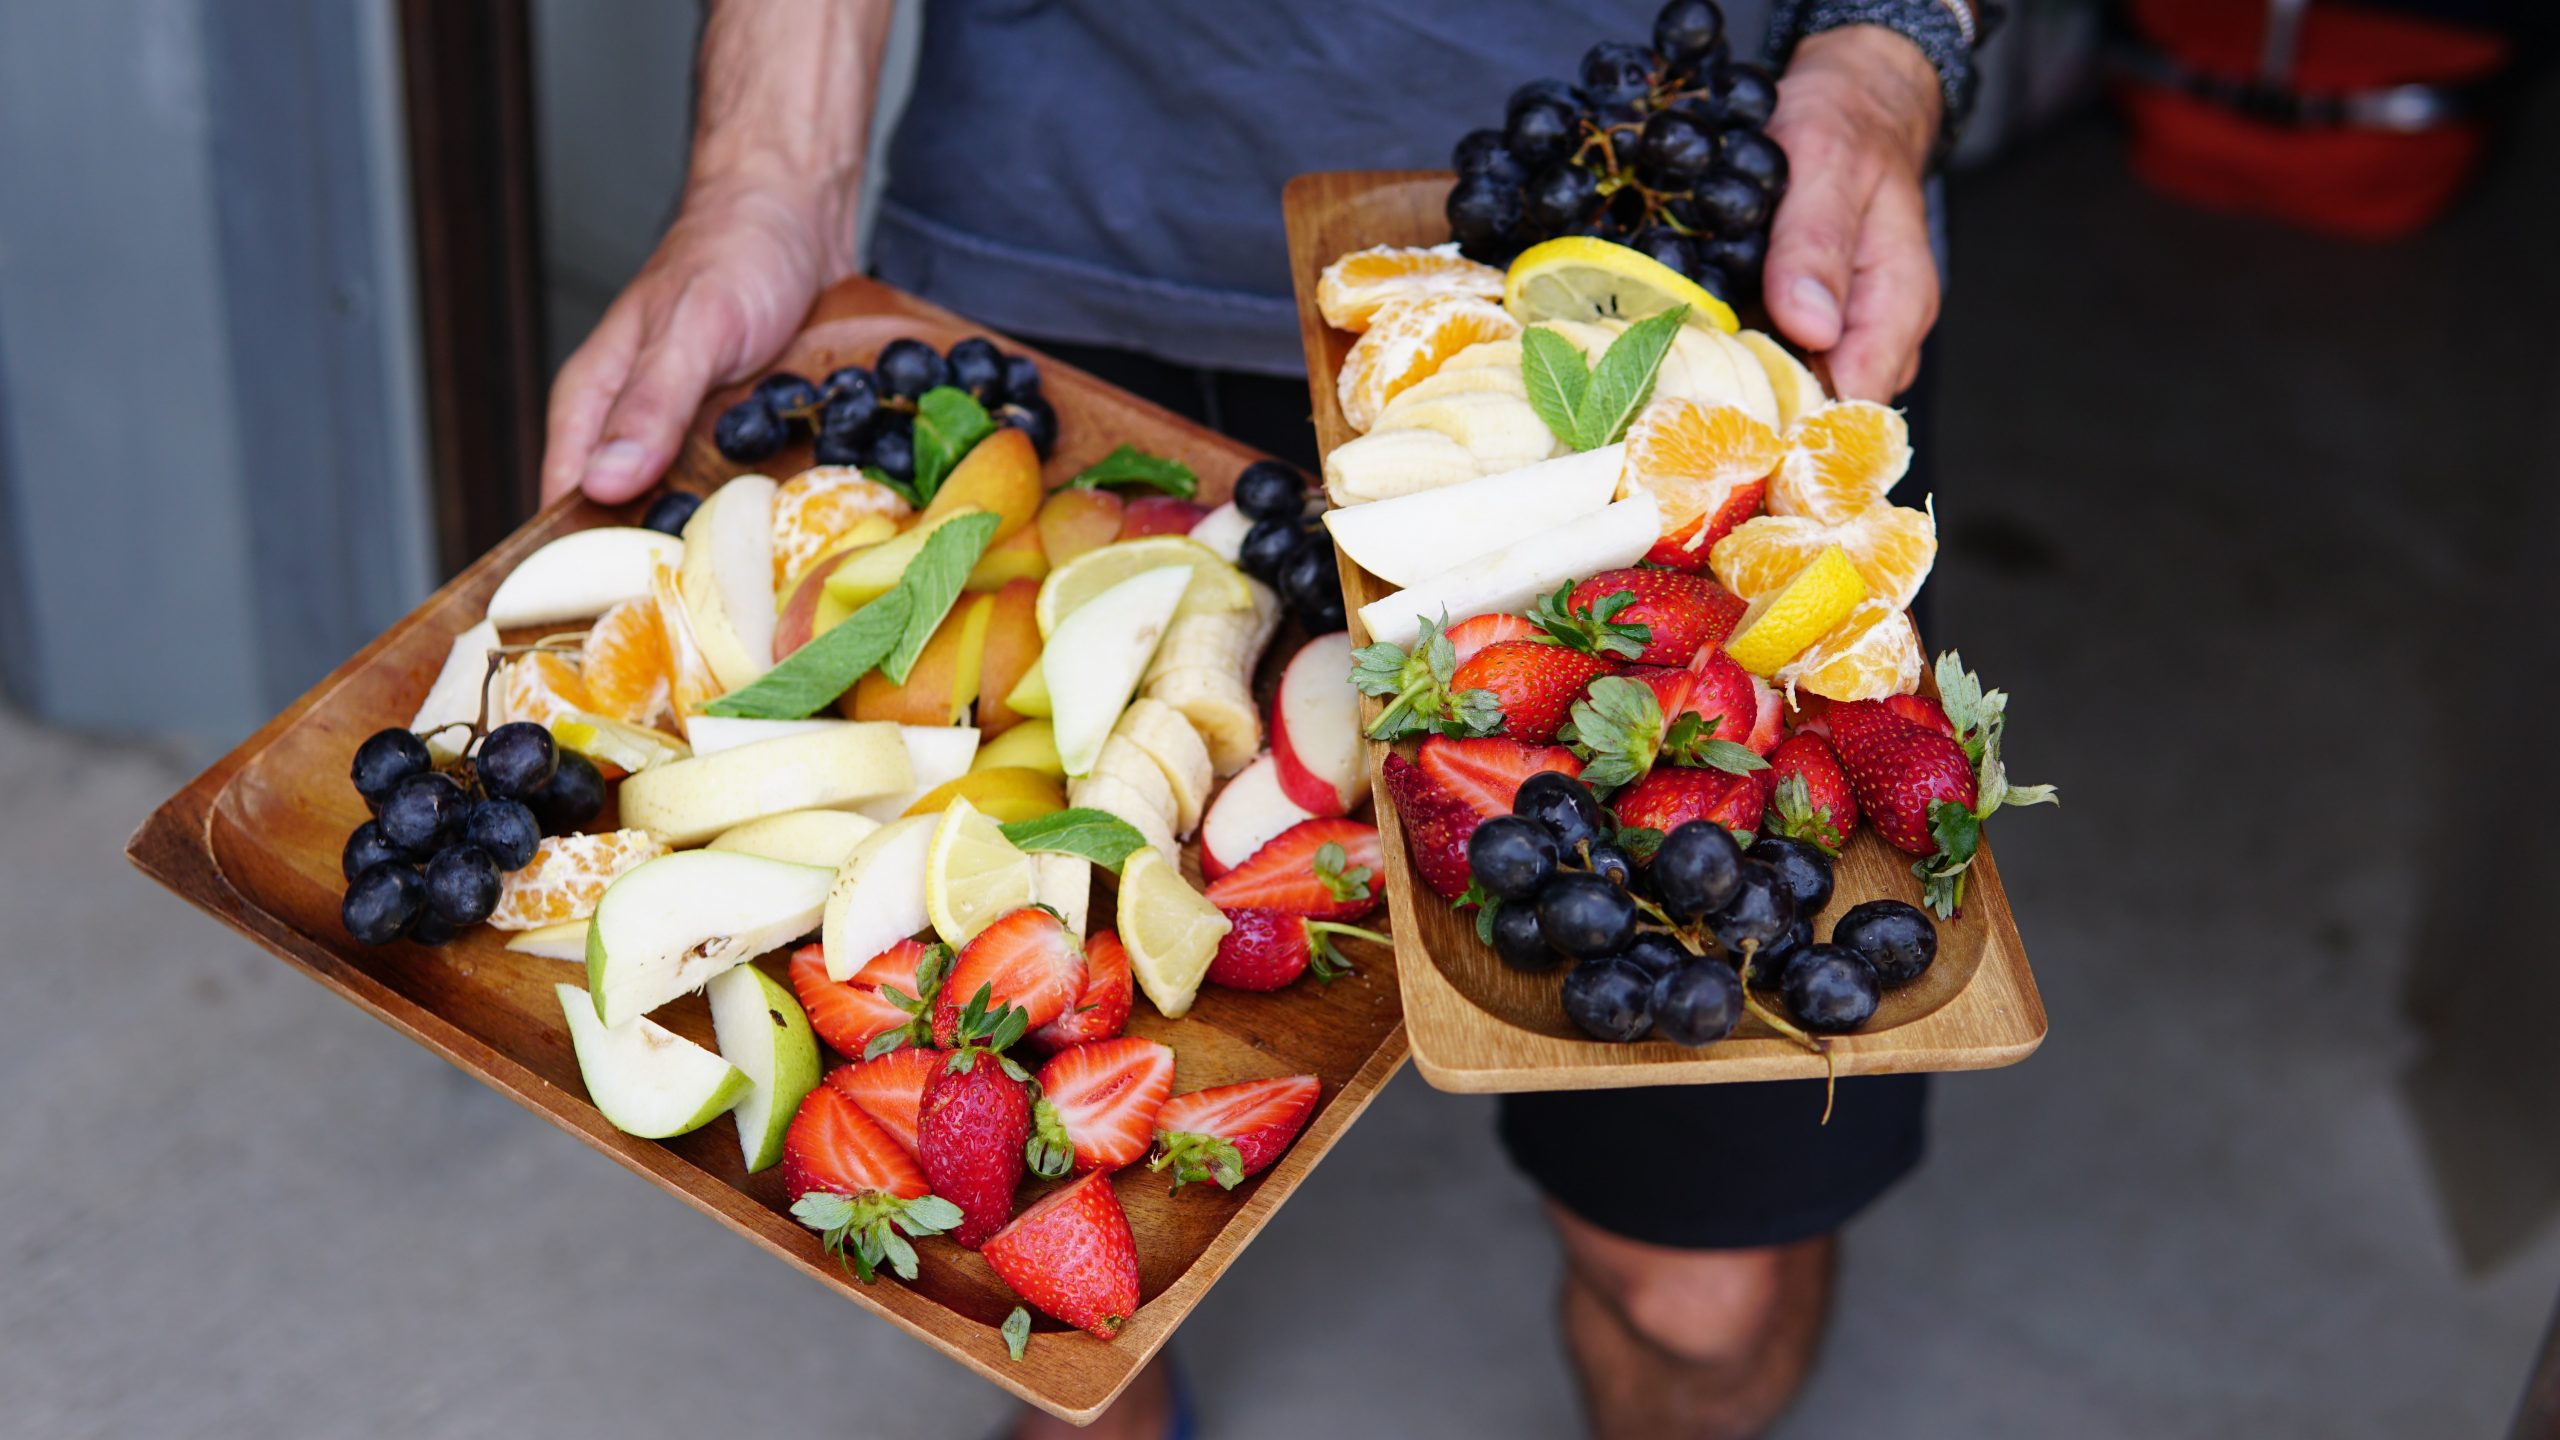 Platters of fresh fruit - pandemic food that ought to be pesticide-free